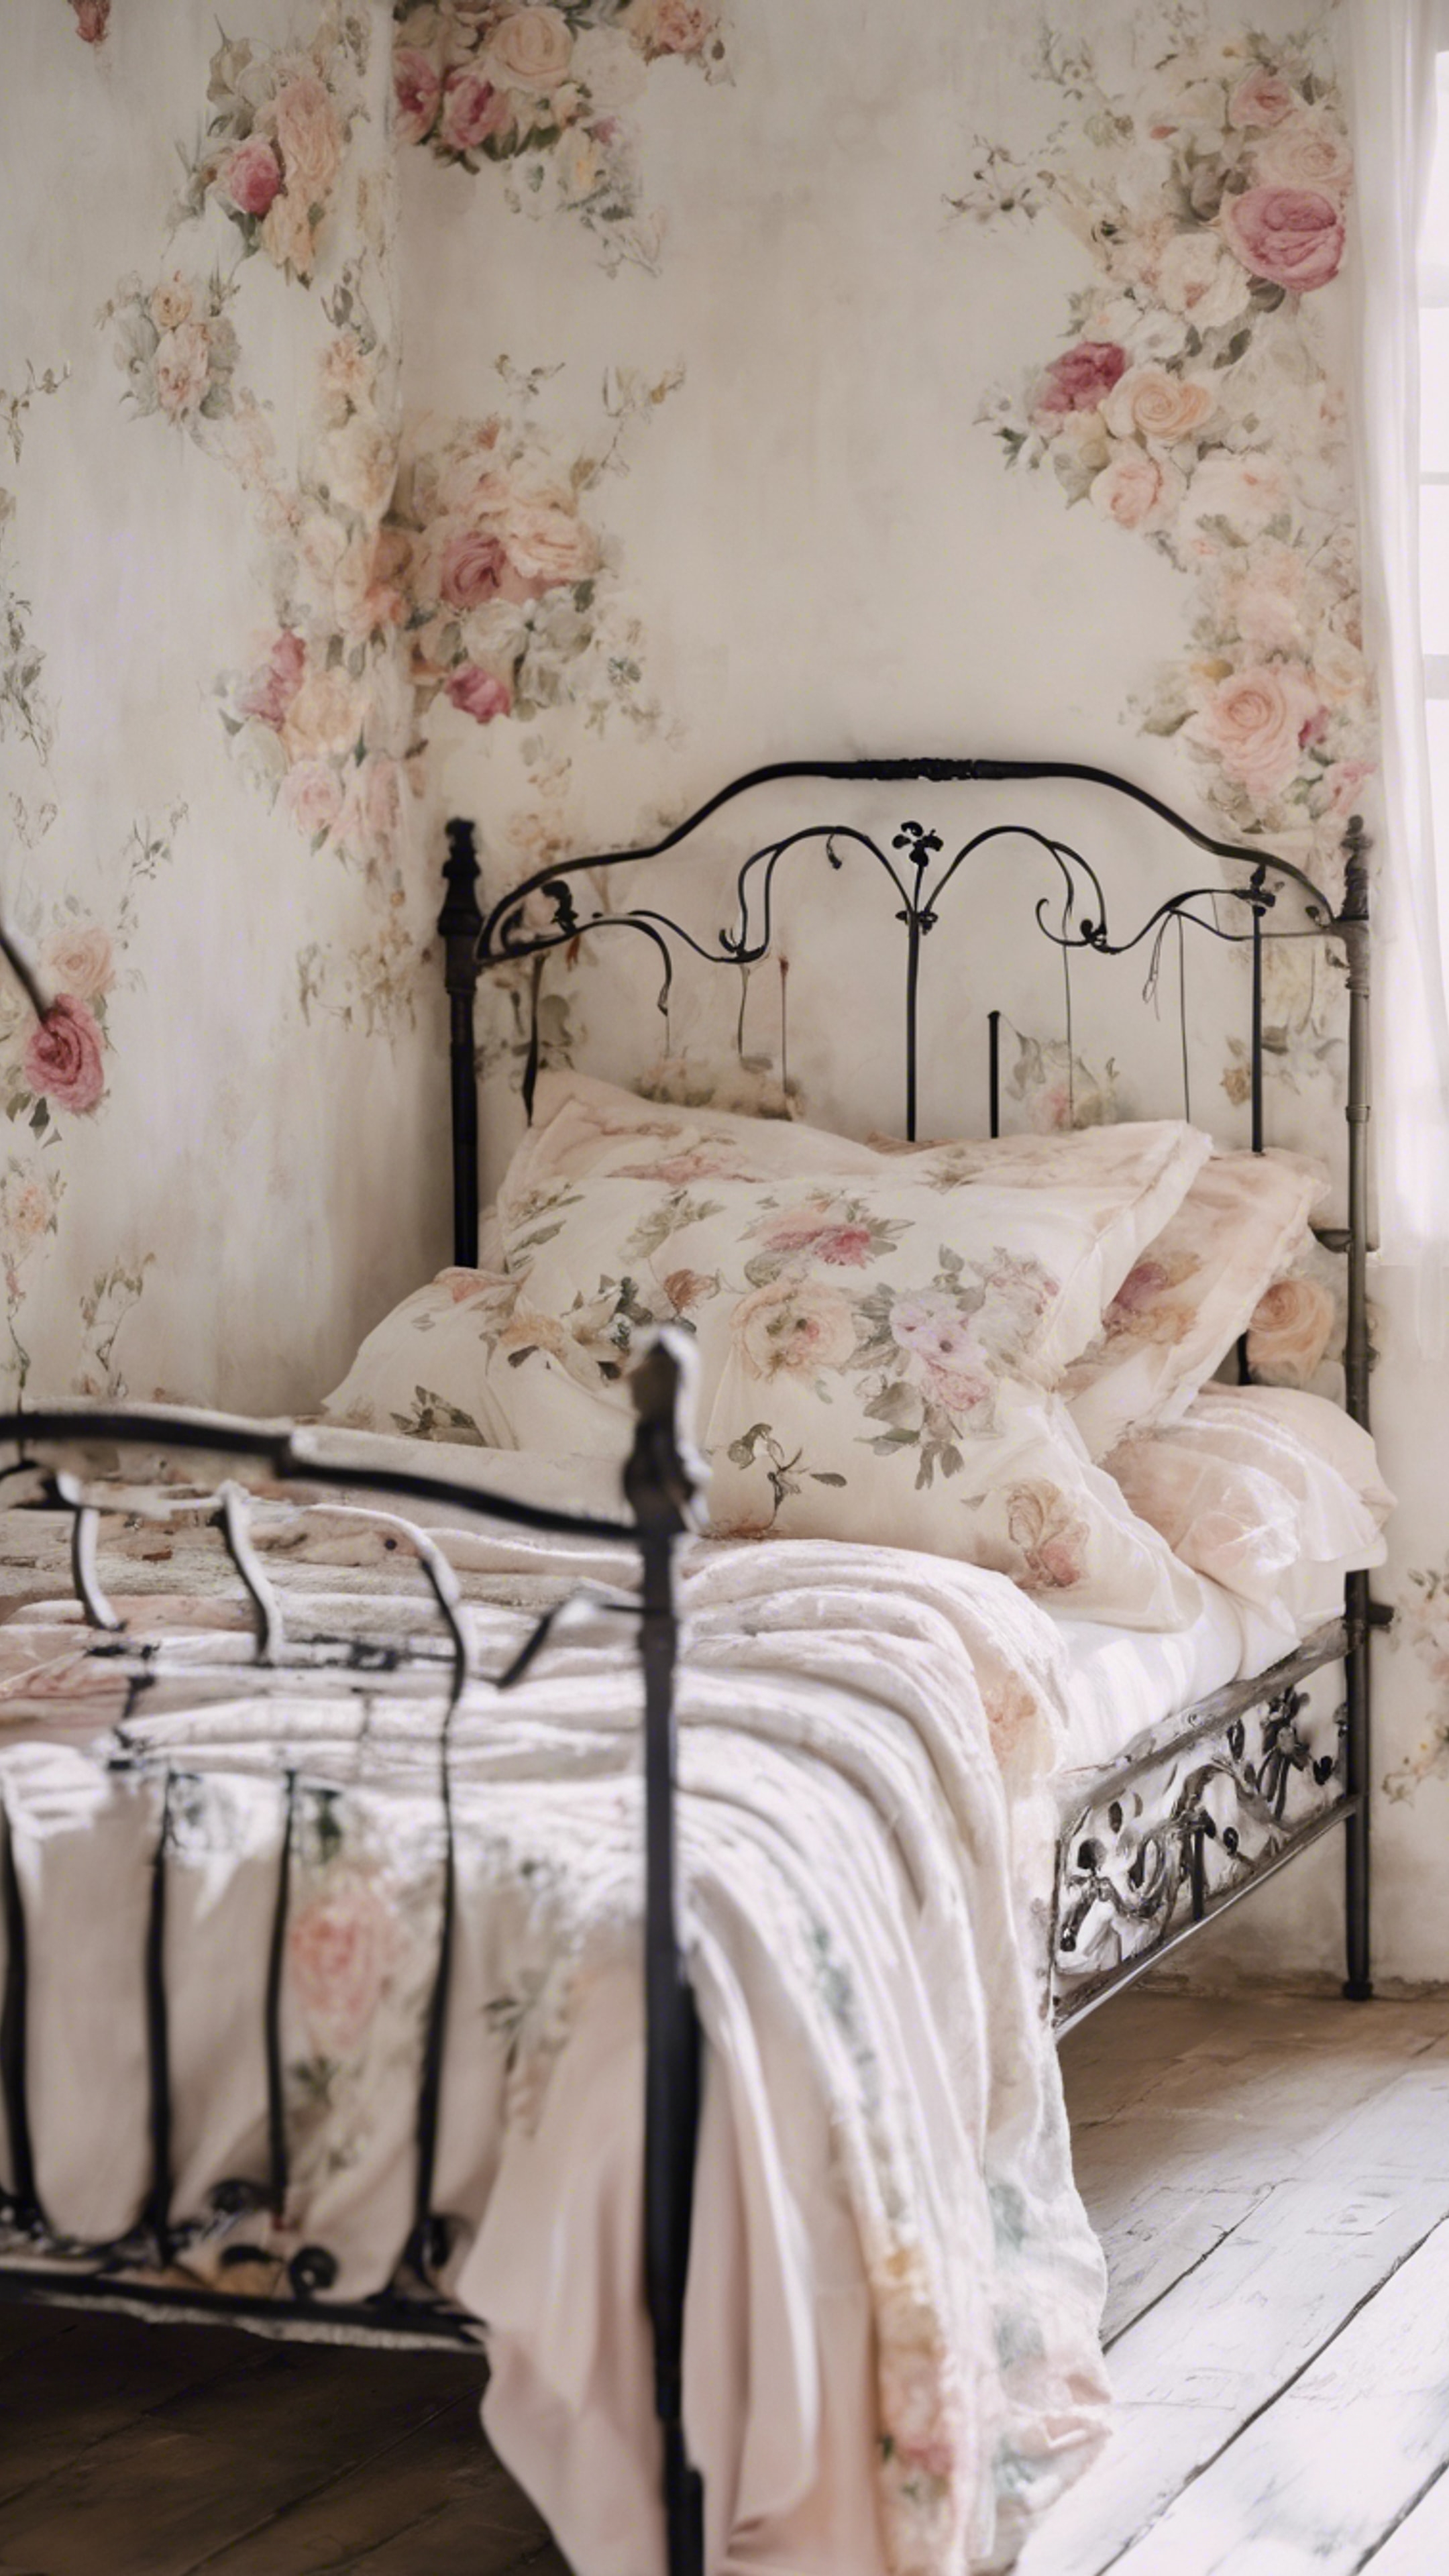 A French country bedroom featuring a wrought-iron bed and pastel floral patterns against whitewashed walls. Tapet[80b94b8799dc4ca6abc7]